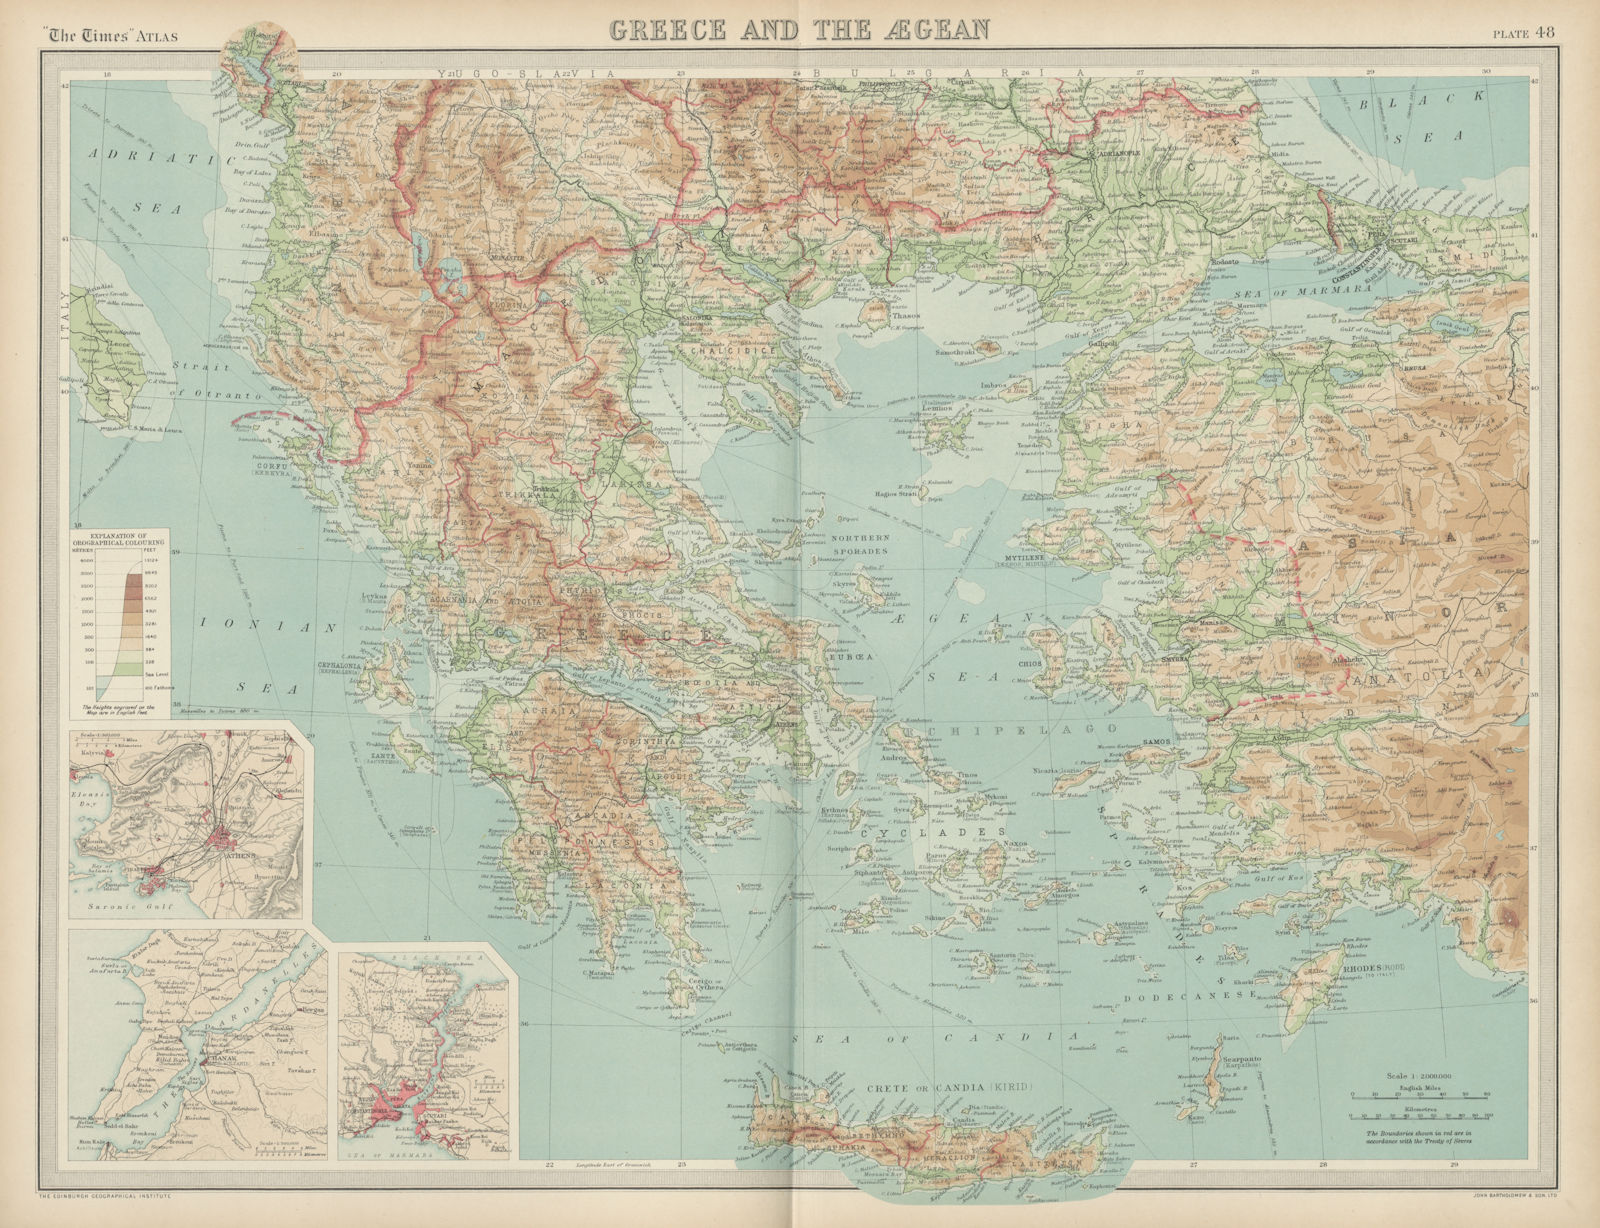 Associate Product Greece Aegean. Greek Zone/Occupation of Smyrna/Izmir East Thrace. TIMES 1922 map